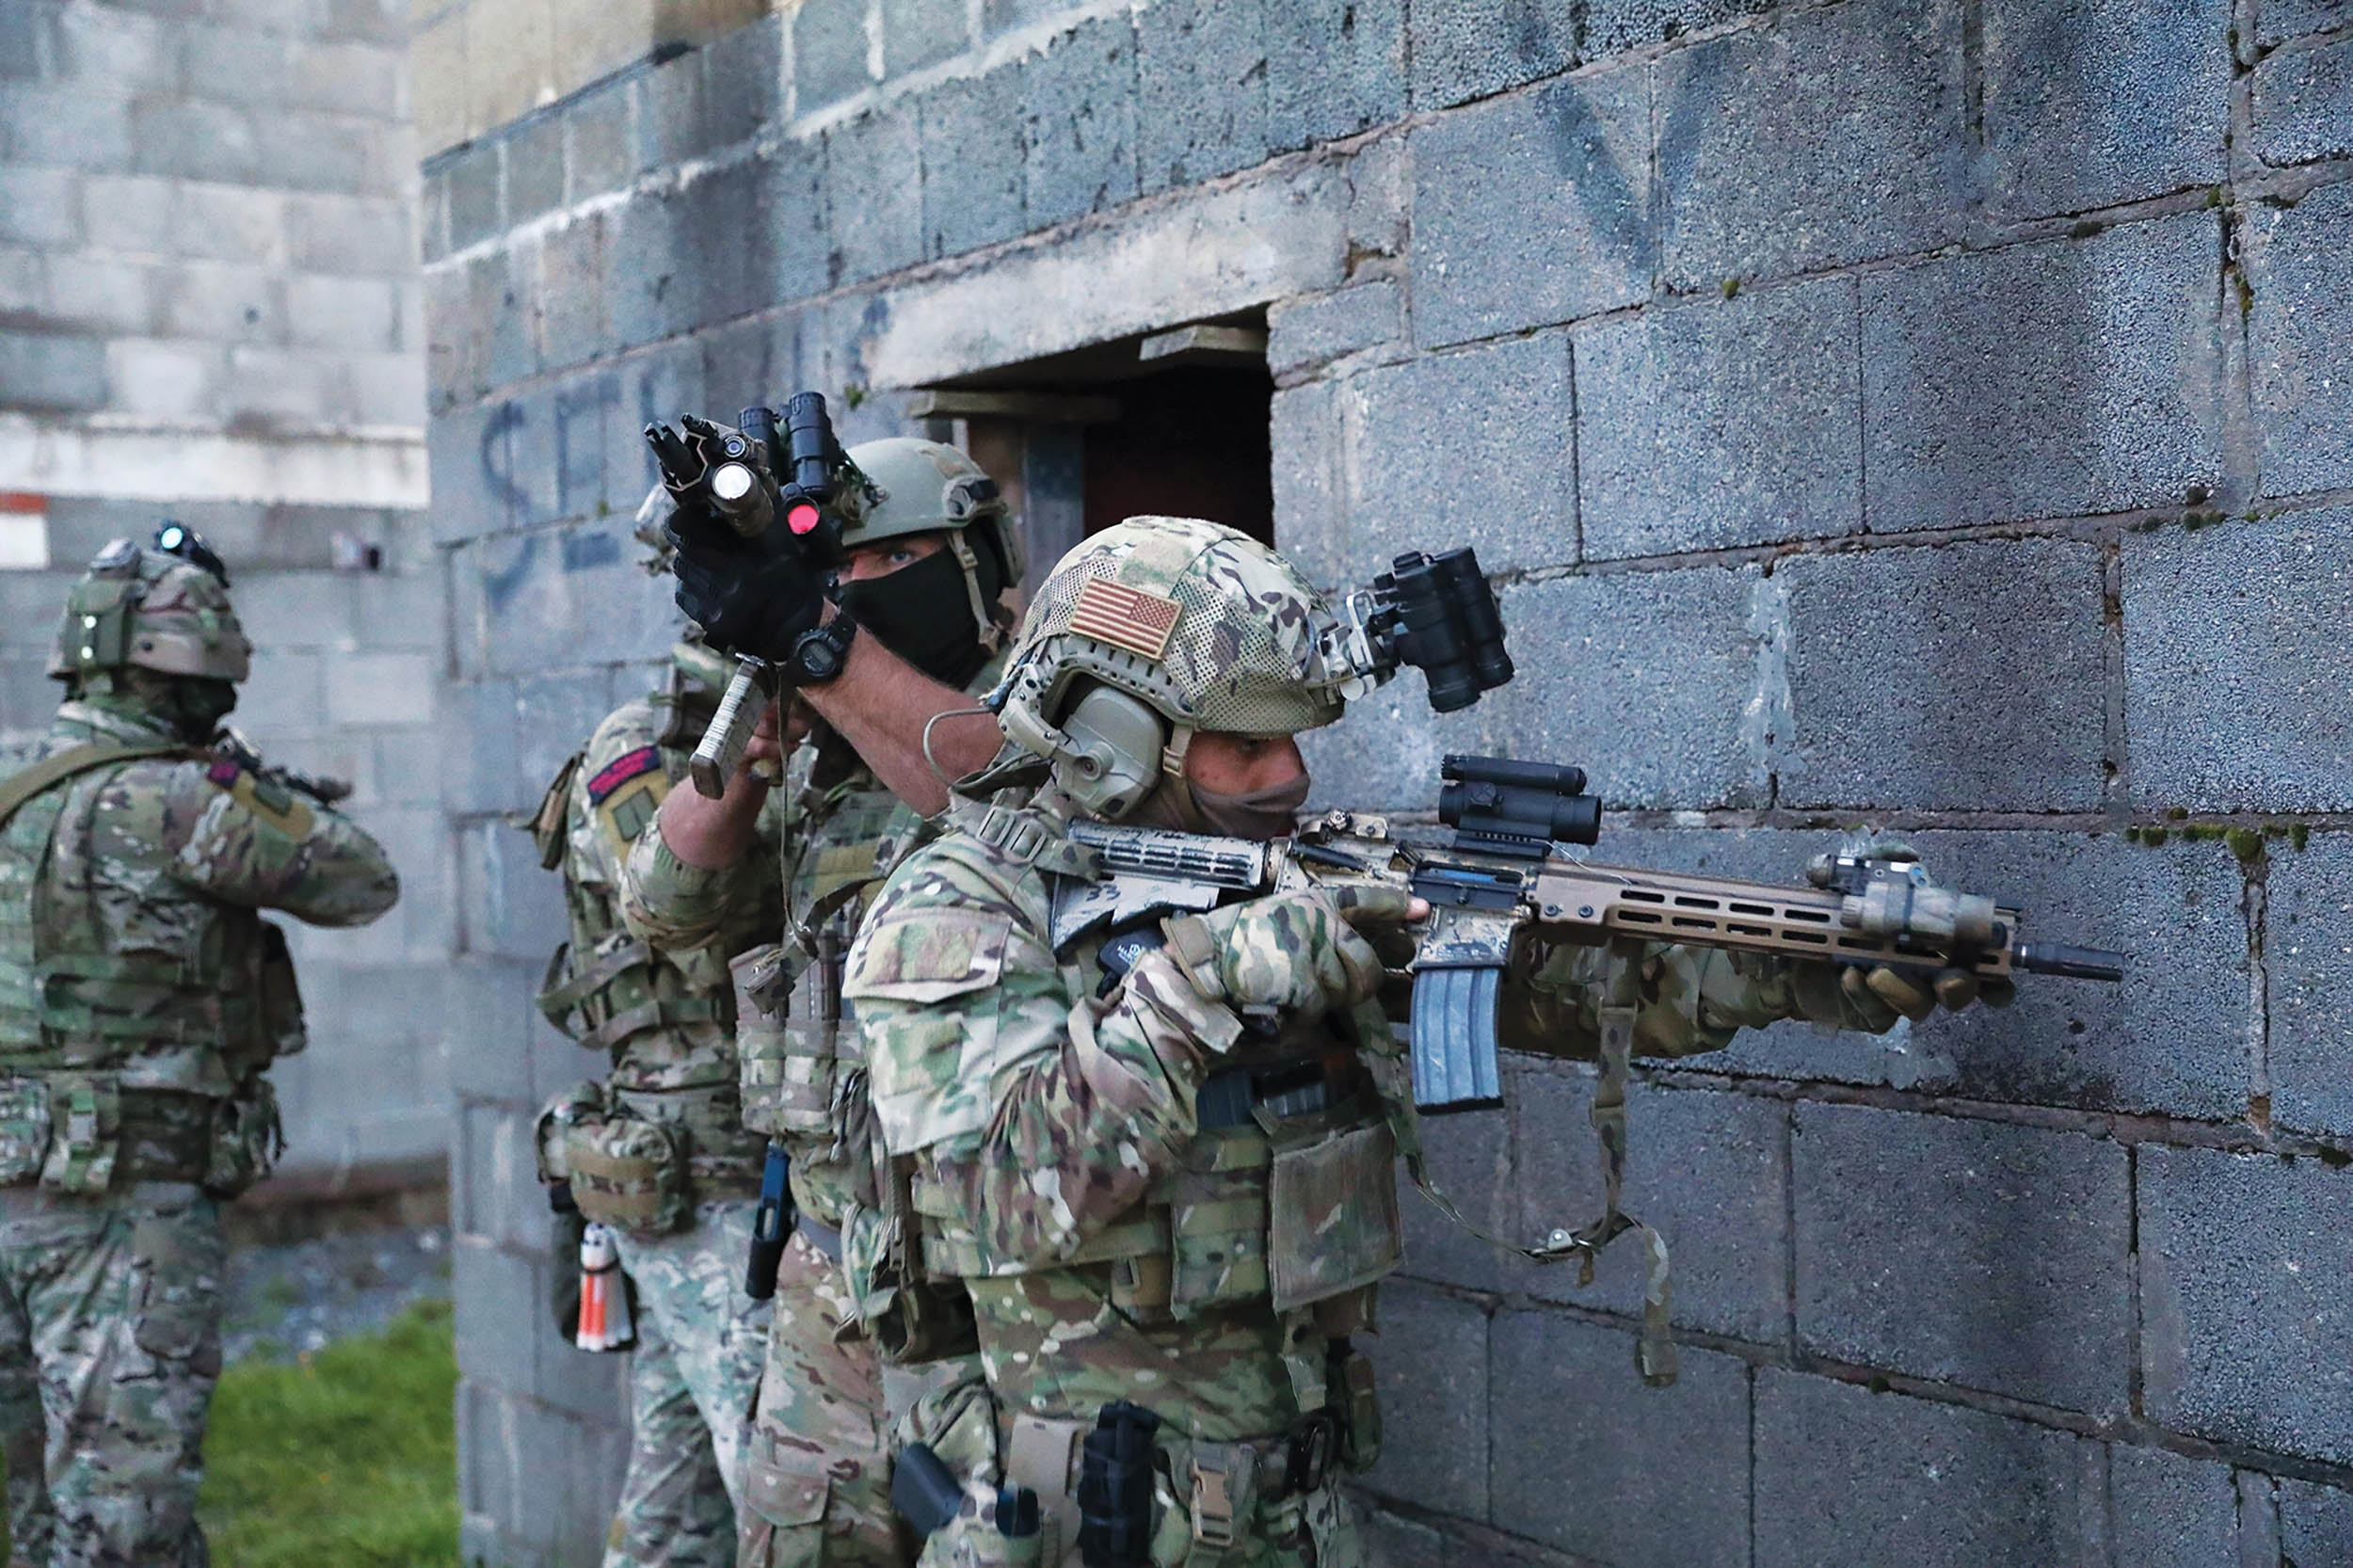 United Kingdom Royal Marines and U.S. Army Green Berets provide security before entering building during close quarter battle training at Grafenwöhr Training Area